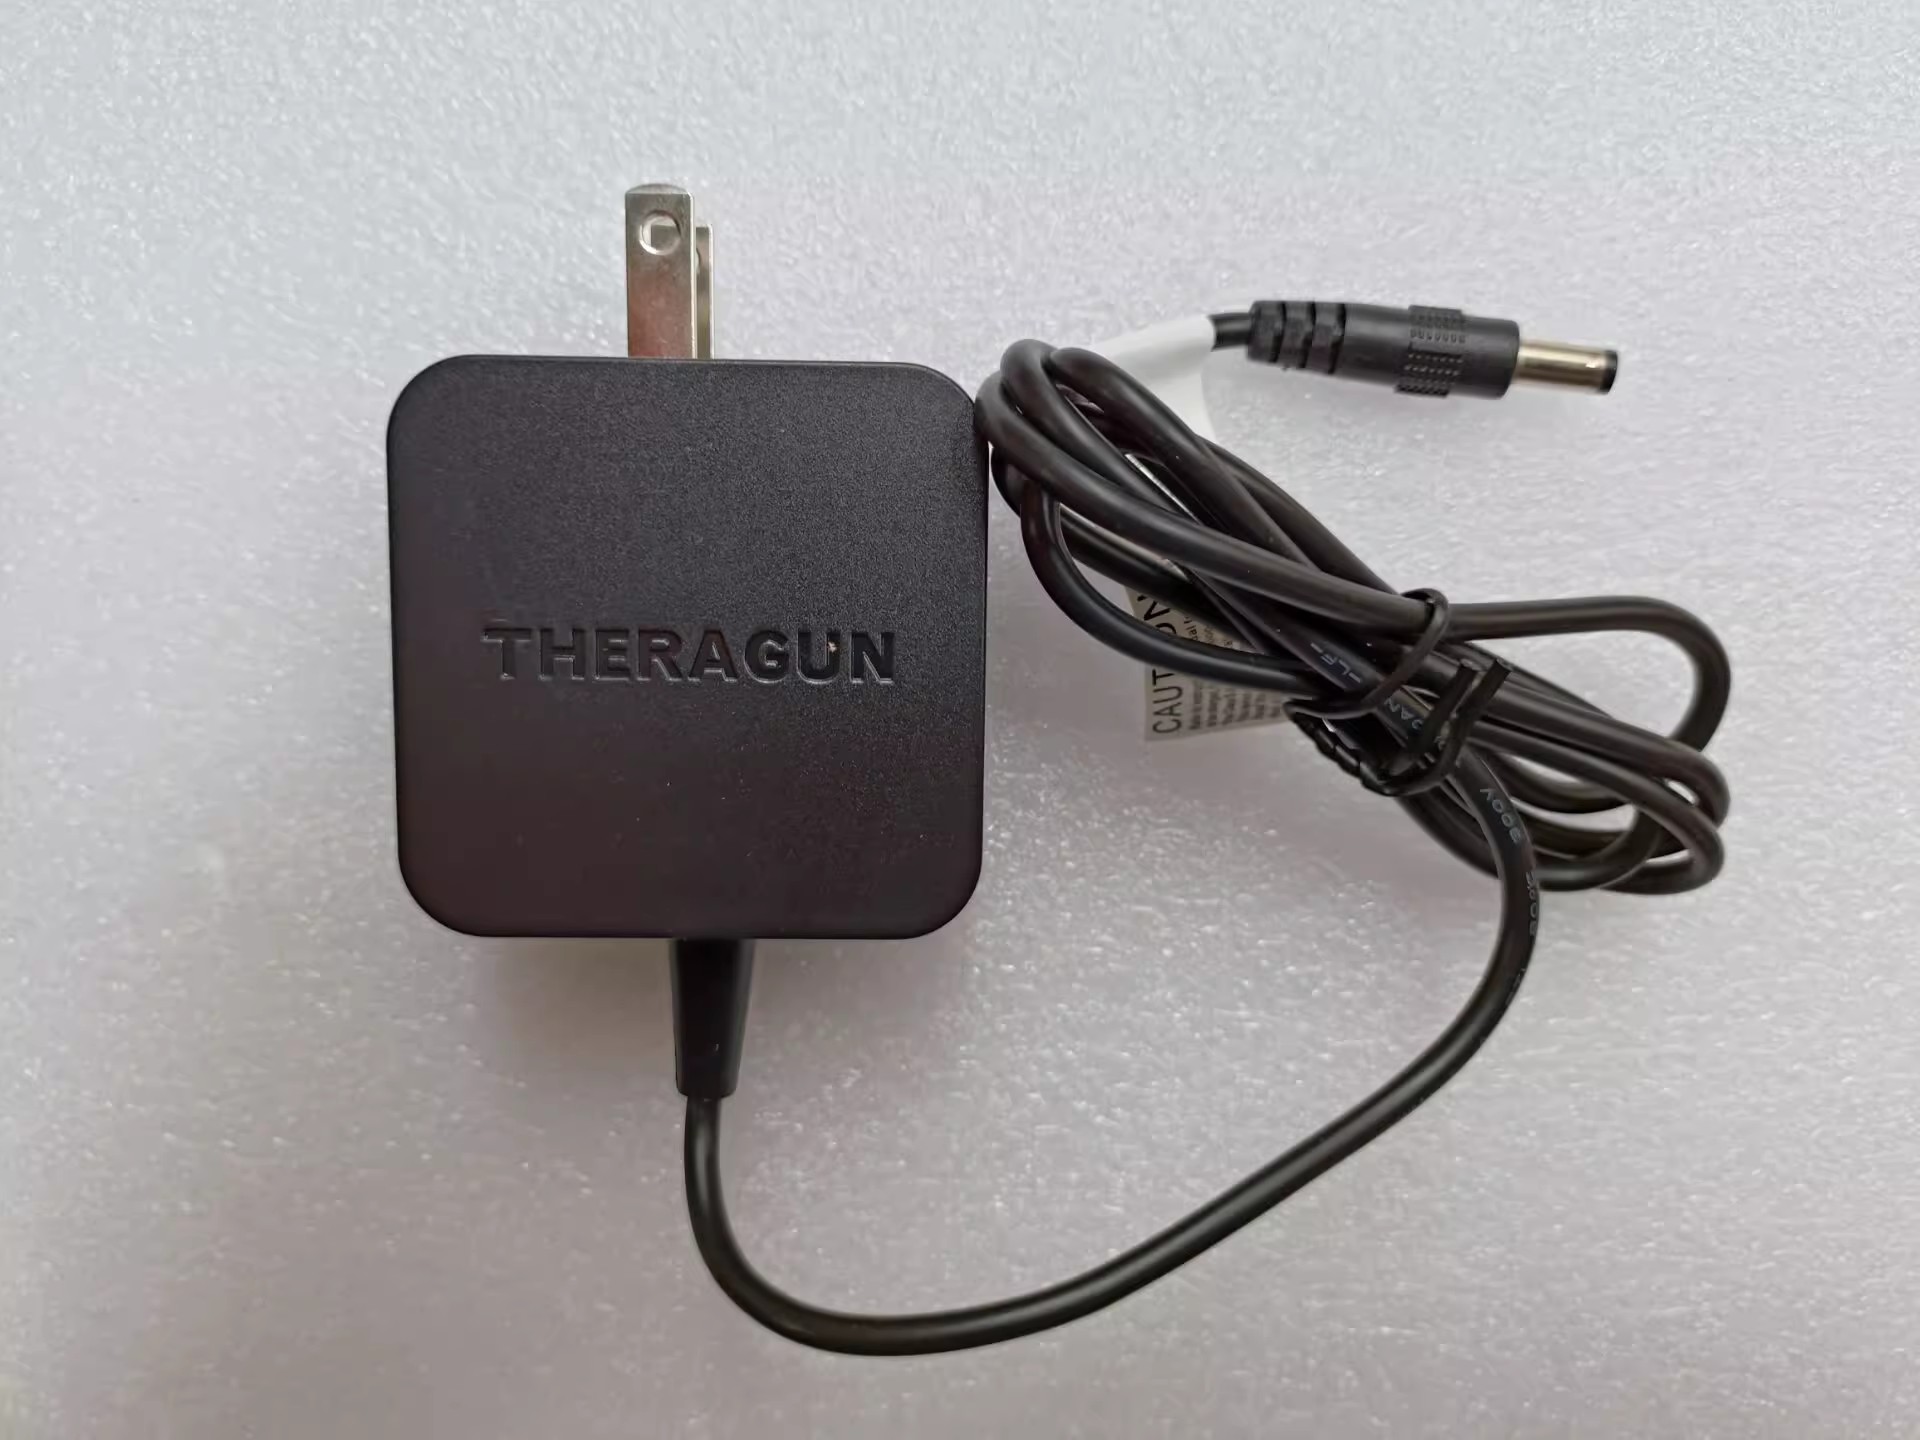 *Brand NEW* THERAGUN HXD302-1501500 15V 1.5A AC DC ADAPTHE POWER Supply